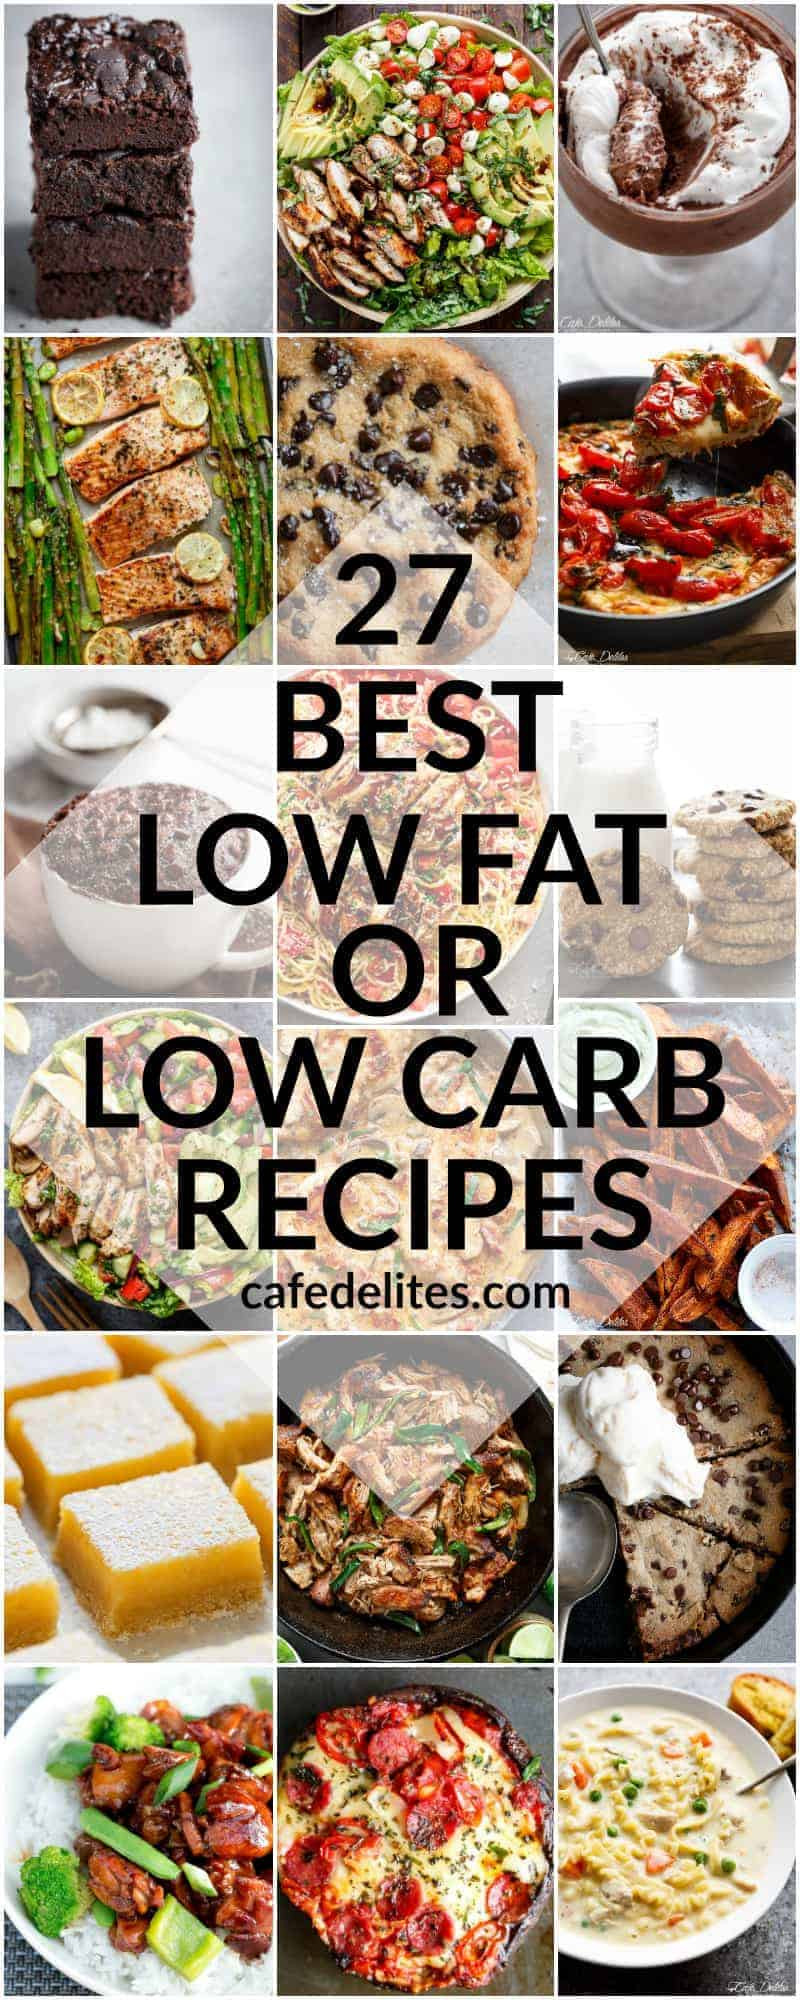 Low Fat Low Cholesterol Recipes
 27 BEST LOW FAT & LOW CARB RECIPES FOR 2017 Cafe Delites